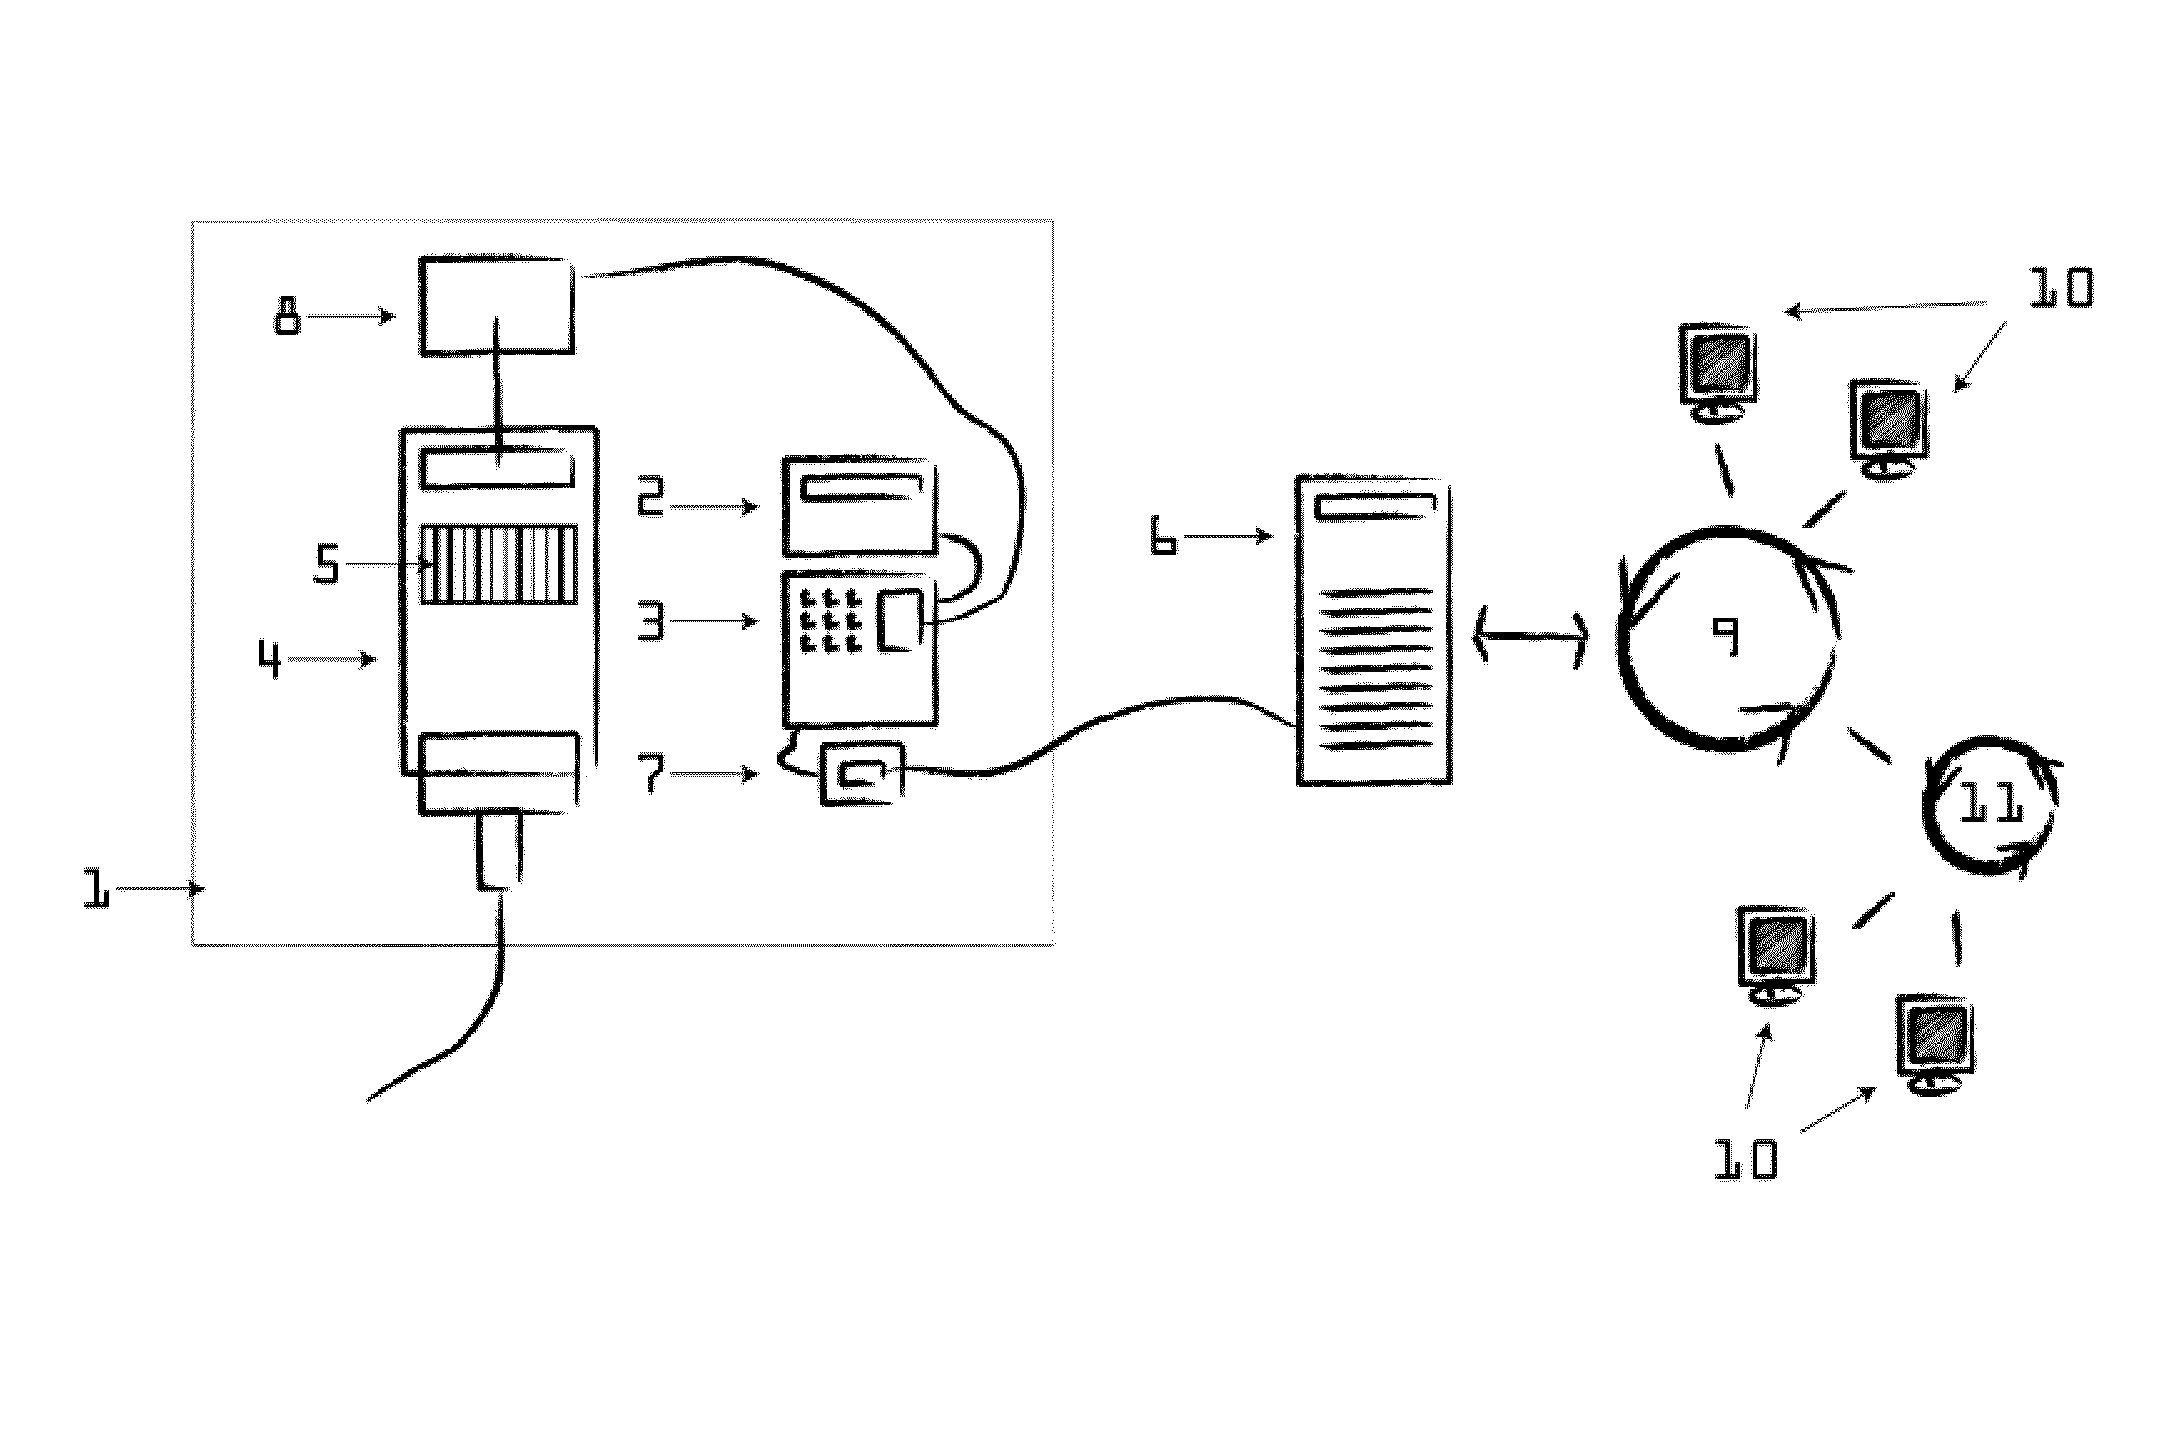 Monitoring system for a medical liquid dispensing device